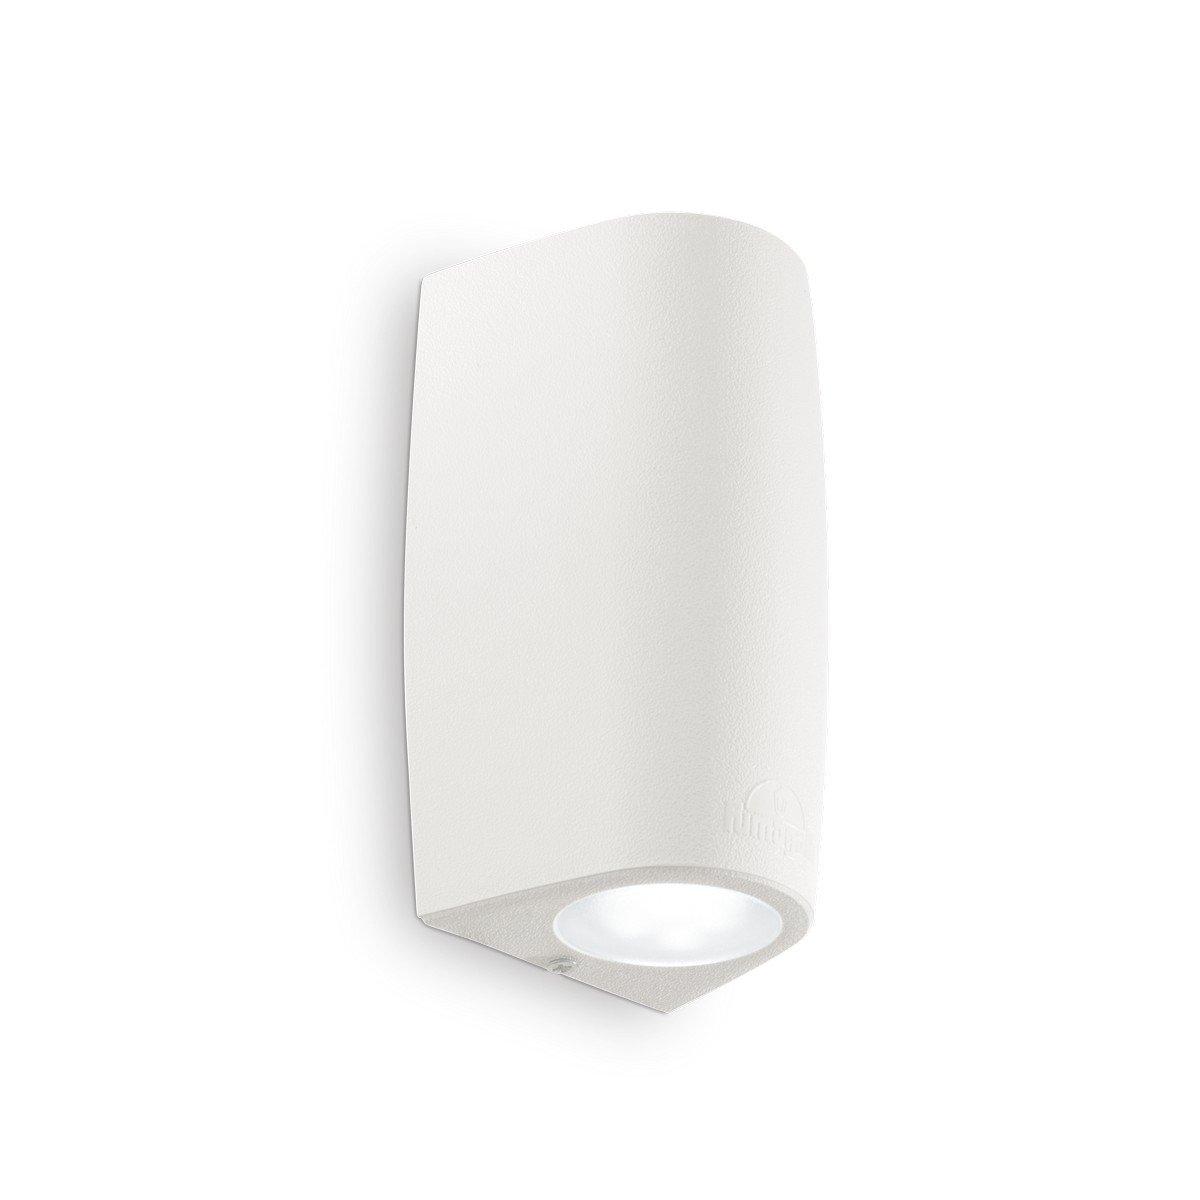 Keope LED 2 Light Outdoor Small Up Down Wall Light White IP55 GU10